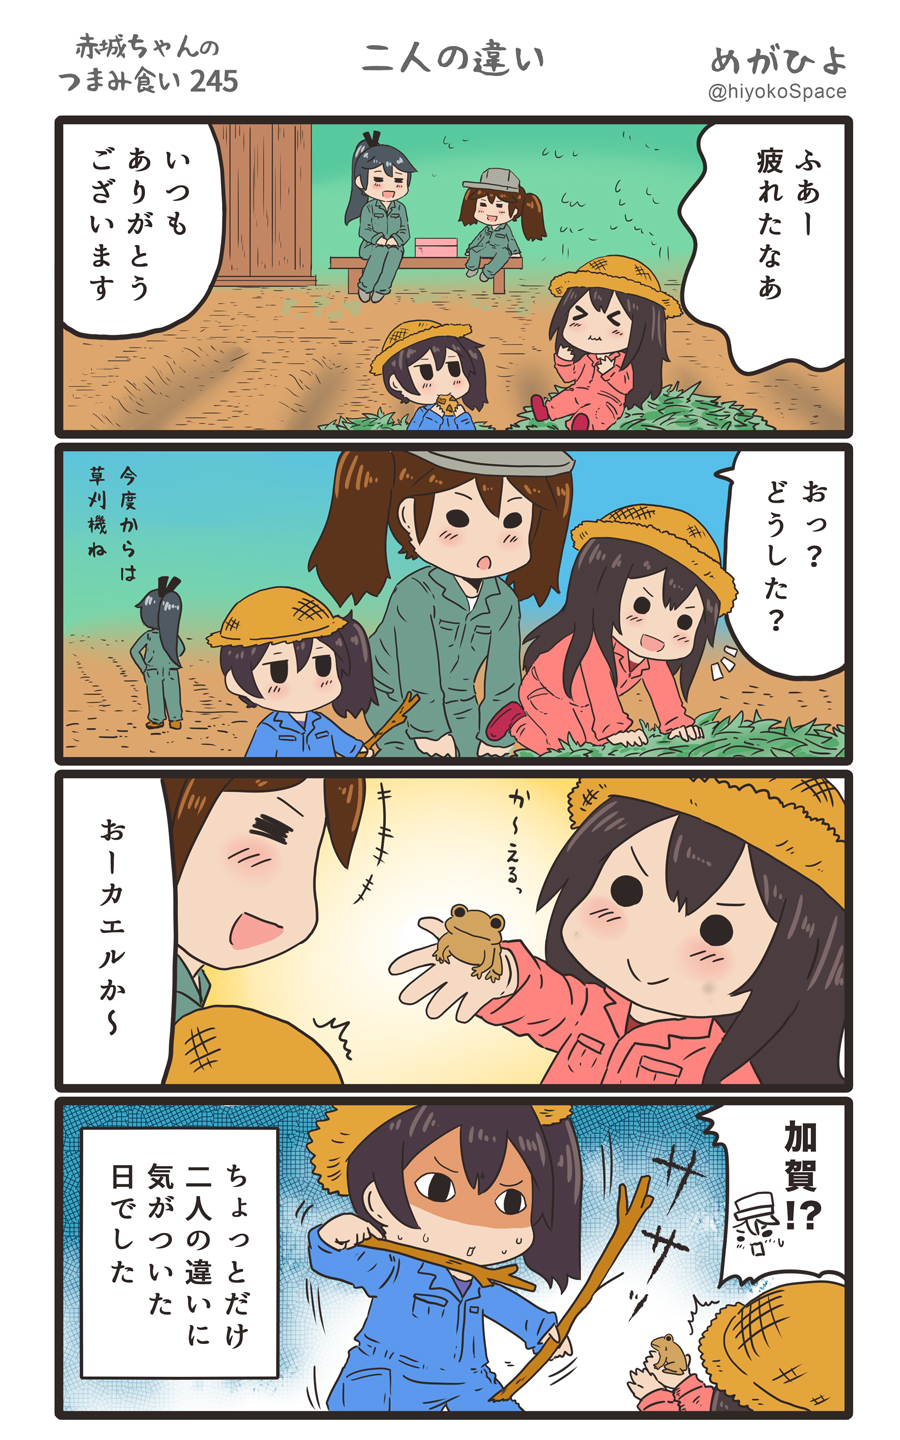 &gt;:) &gt;_&lt; +++ 4girls 4koma akagi_(kantai_collection) alternate_costume animal black_hair brown_hair comic commentary_request eating food frog hair_between_eyes highres holding holding_food houshou_(kantai_collection) kaga_(kantai_collection) kantai_collection long_hair long_sleeves megahiyo multiple_girls open_mouth pants ponytail ryuujou_(kantai_collection) shaded_face short_hair side_ponytail smile speech_bubble translation_request twintails twitter_username v-shaped_eyebrows visor_cap